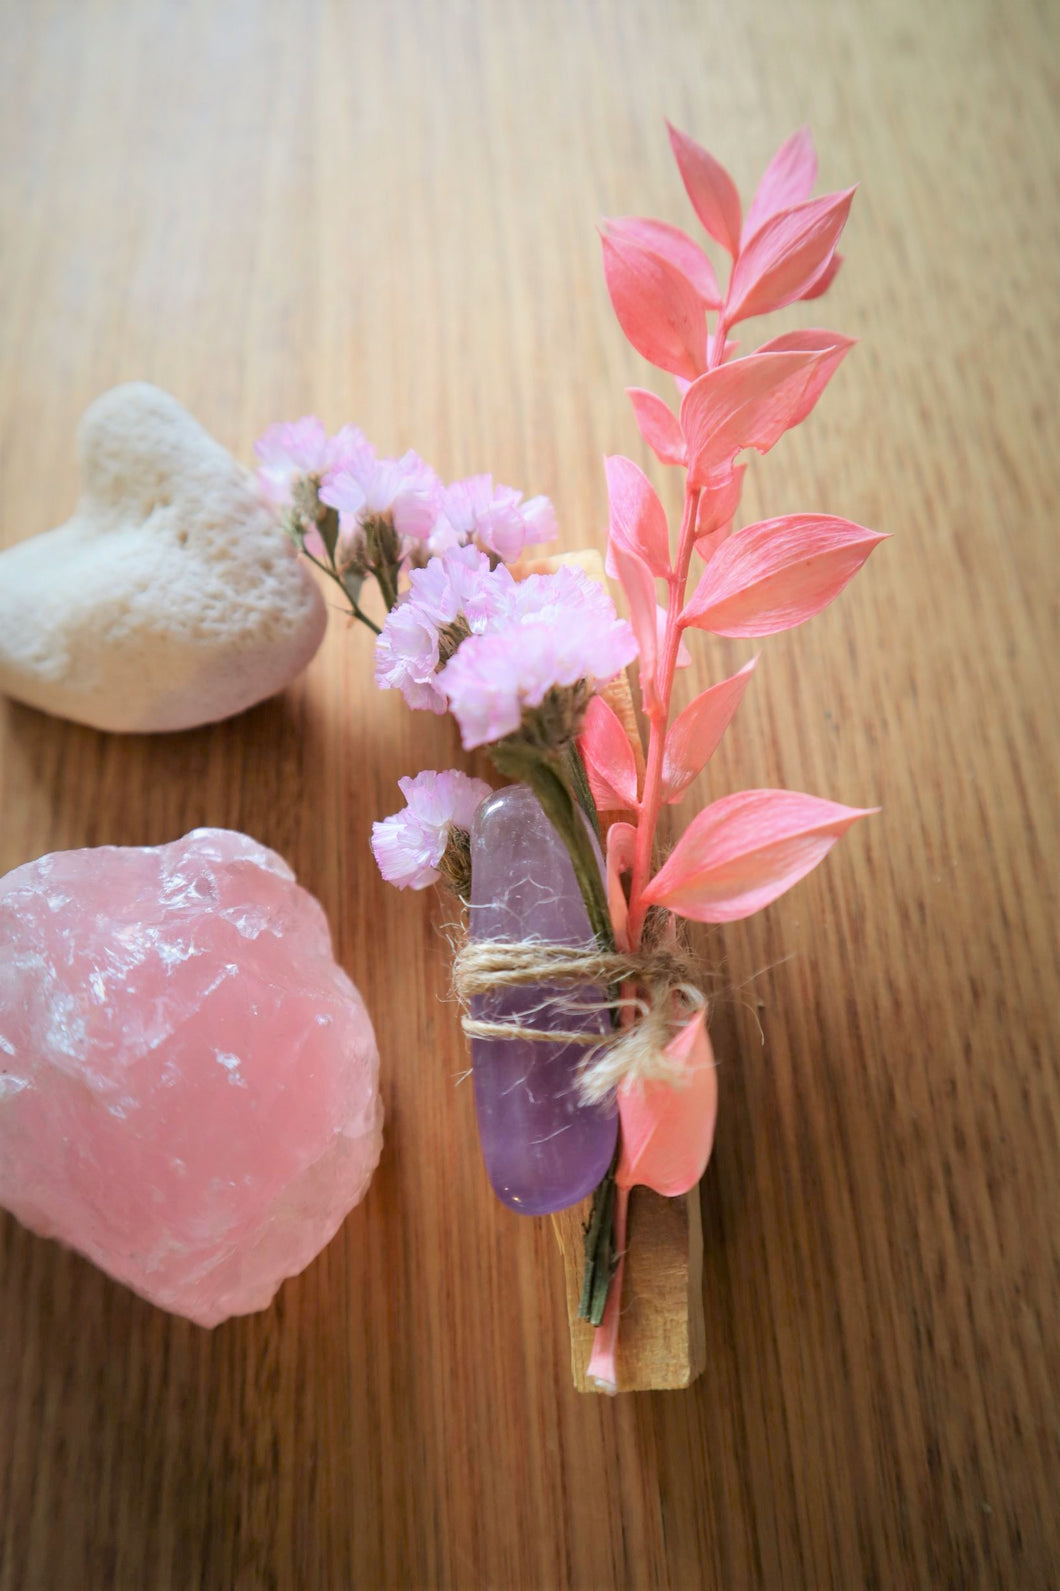 Peace Crystal, Handmade, Traditionally Used, Attracts Positive Energies, Creating Balance and Connection, Cleanse Yourself and Others, Cleanse Your Room, Materials, Palo Santo, Dried Wild Flowers, and Healing Amethyst. 